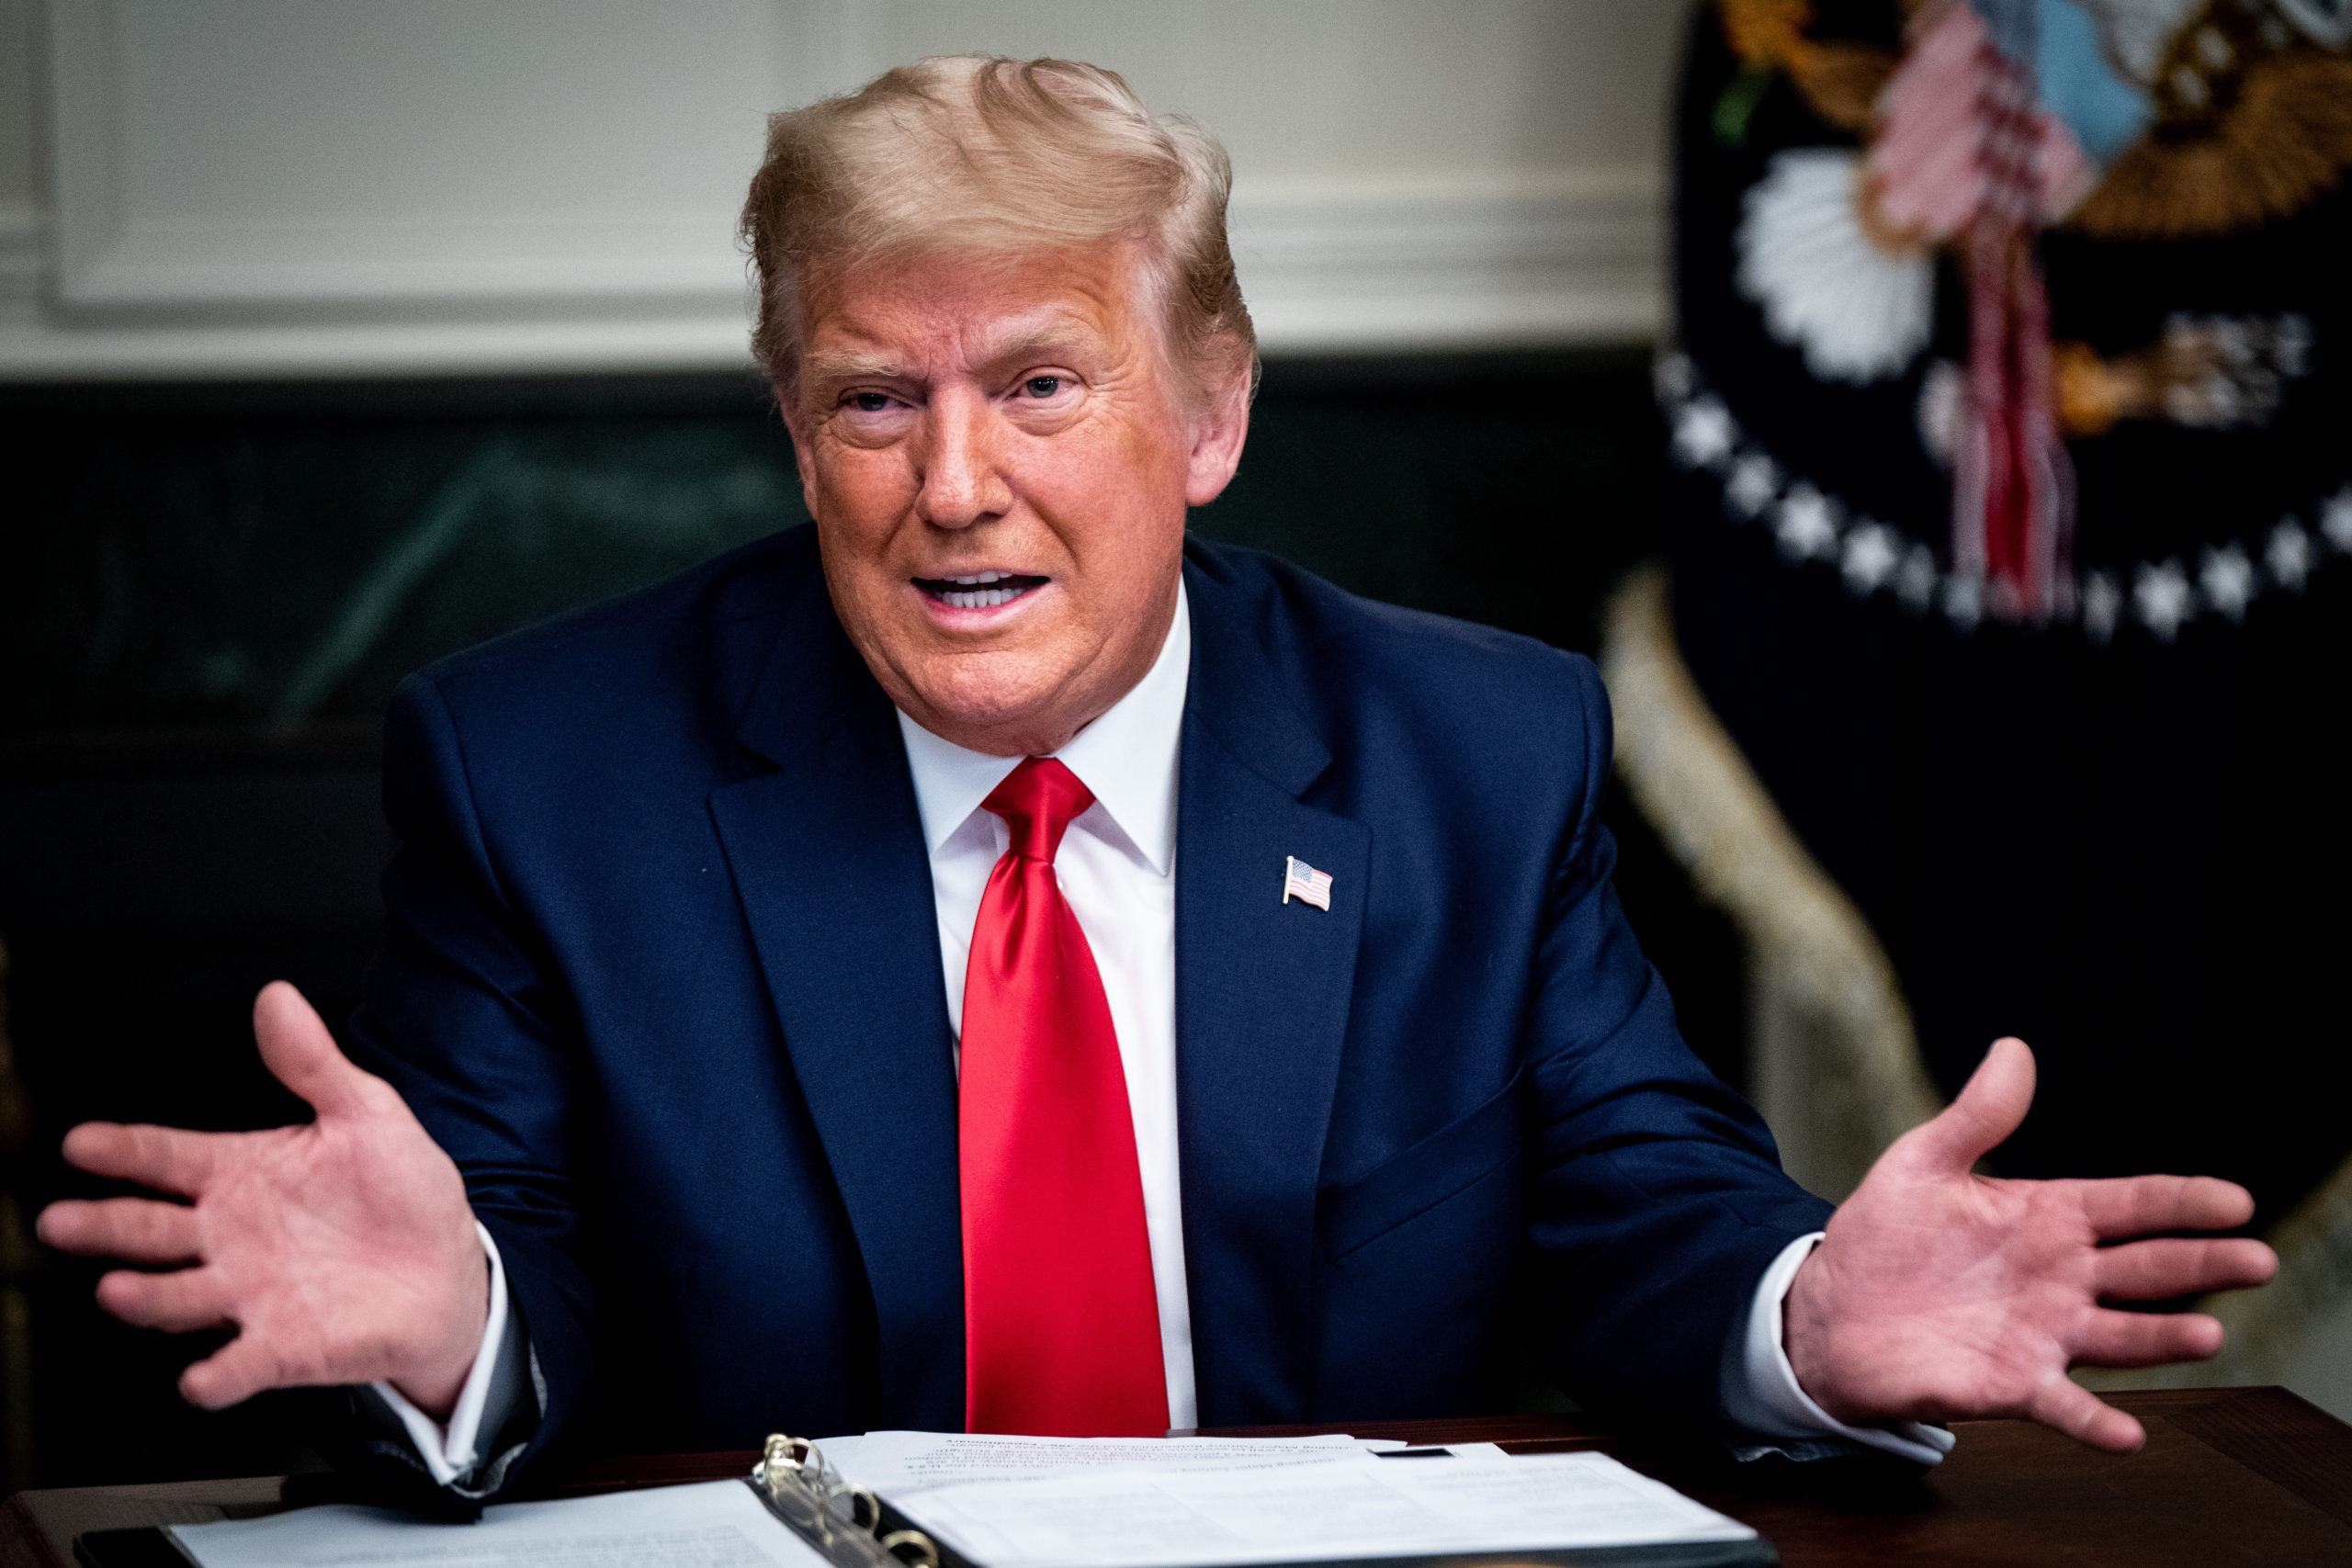 WASHINGTON, DC - NOVEMBER 26: President Donald Trump speaks in the Diplomatic Room of the White House on Thanksgiving on November 26, 2020 in Washington, DC. Trump had earlier made the traditional call to members of the military stationed abroad through video teleconference. (Erin Schaff - Pool/Getty Images)